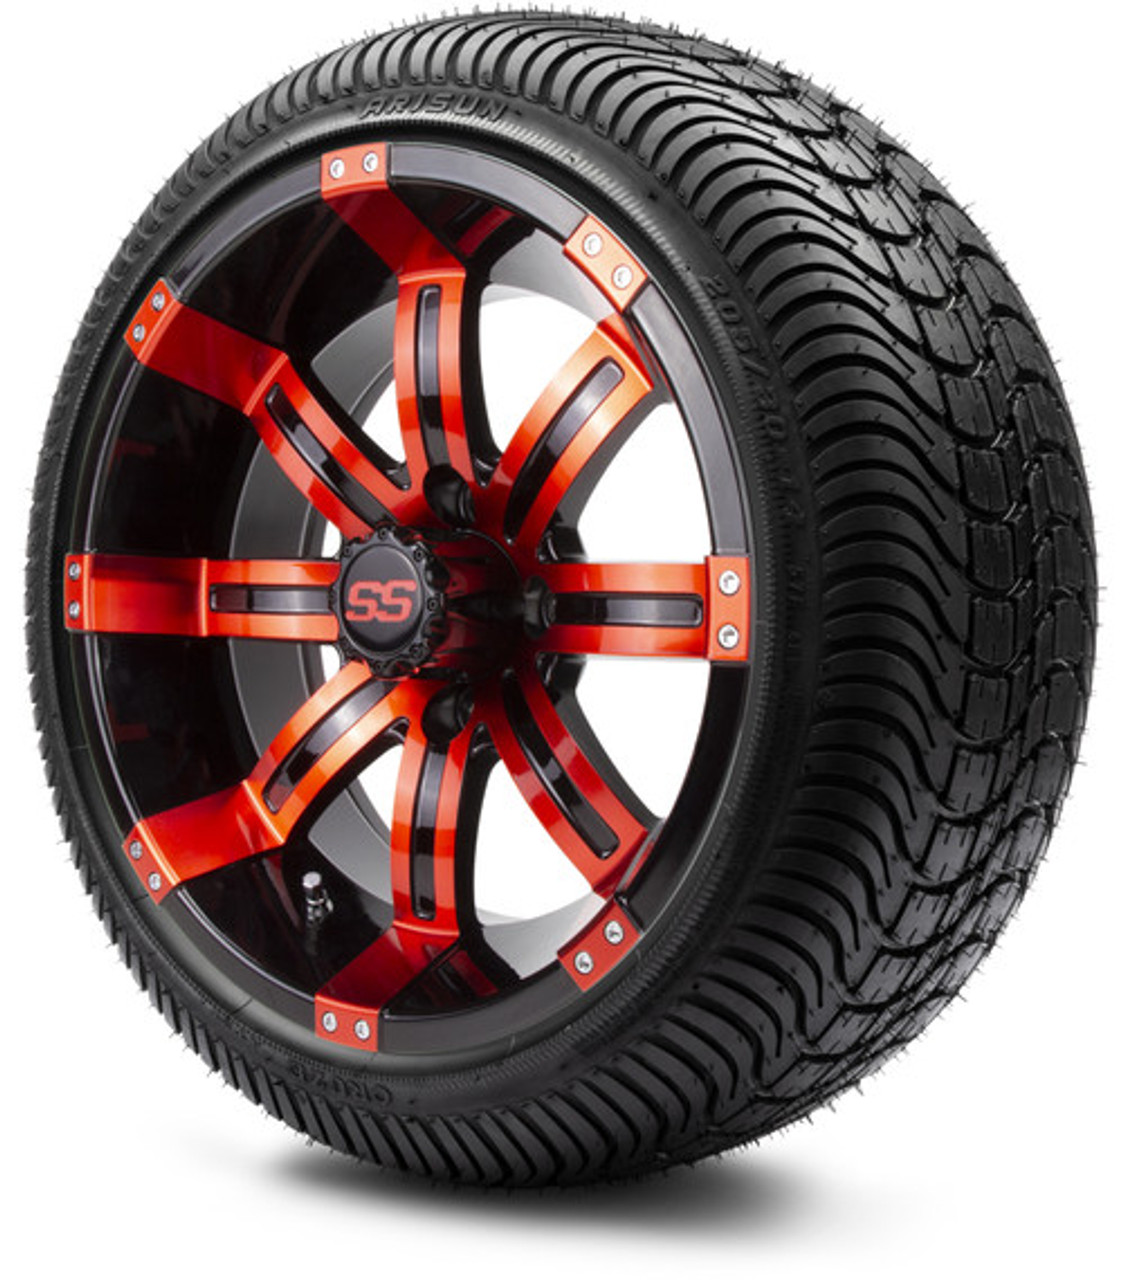 MODZ 14" Tempest Red and Black Wheels & Street Tires Combo